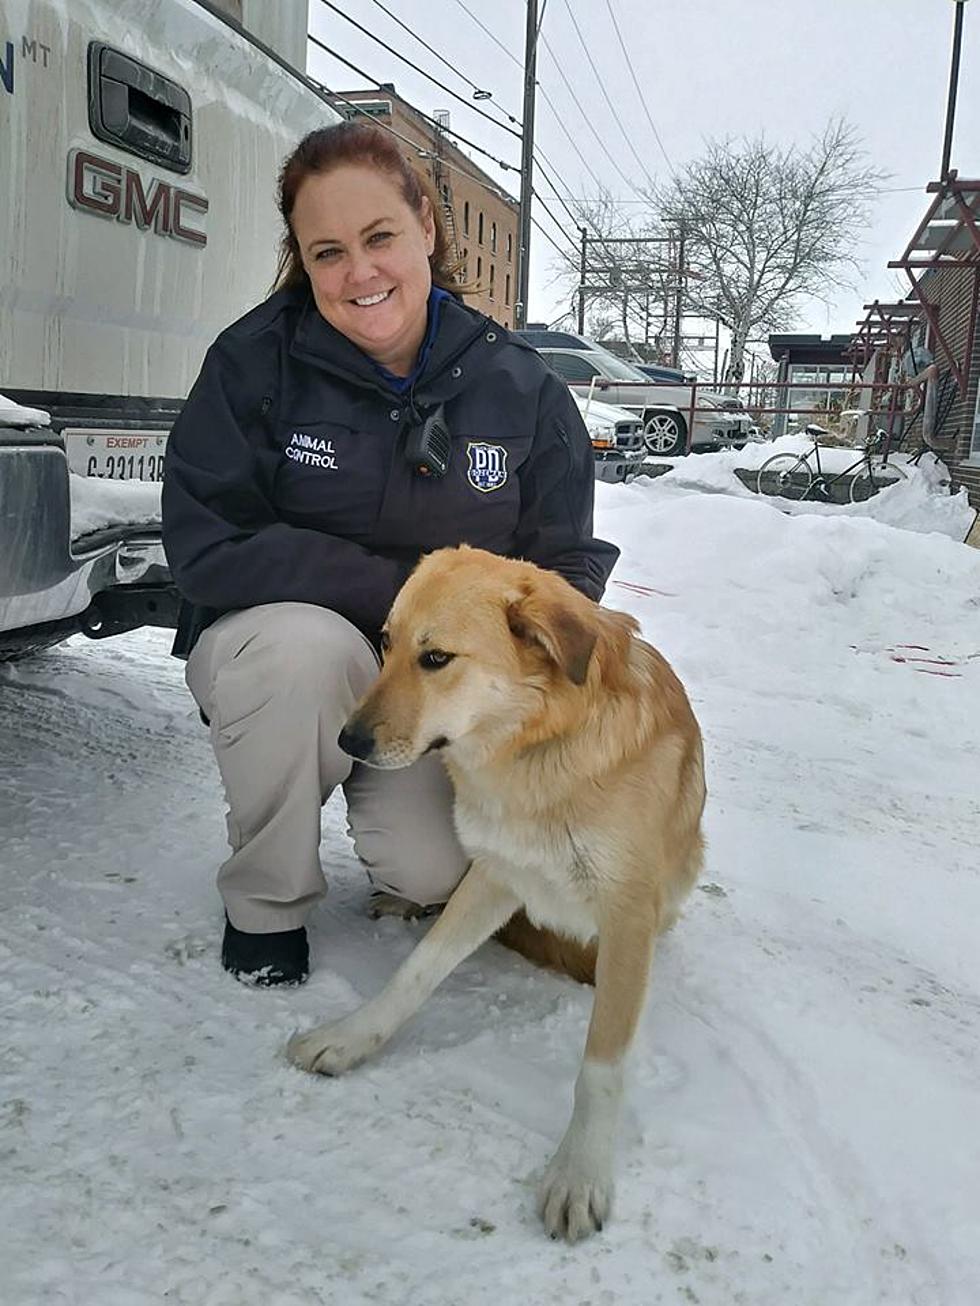 Bozeman’s ‘Most Wanted’ Dog Finally Located